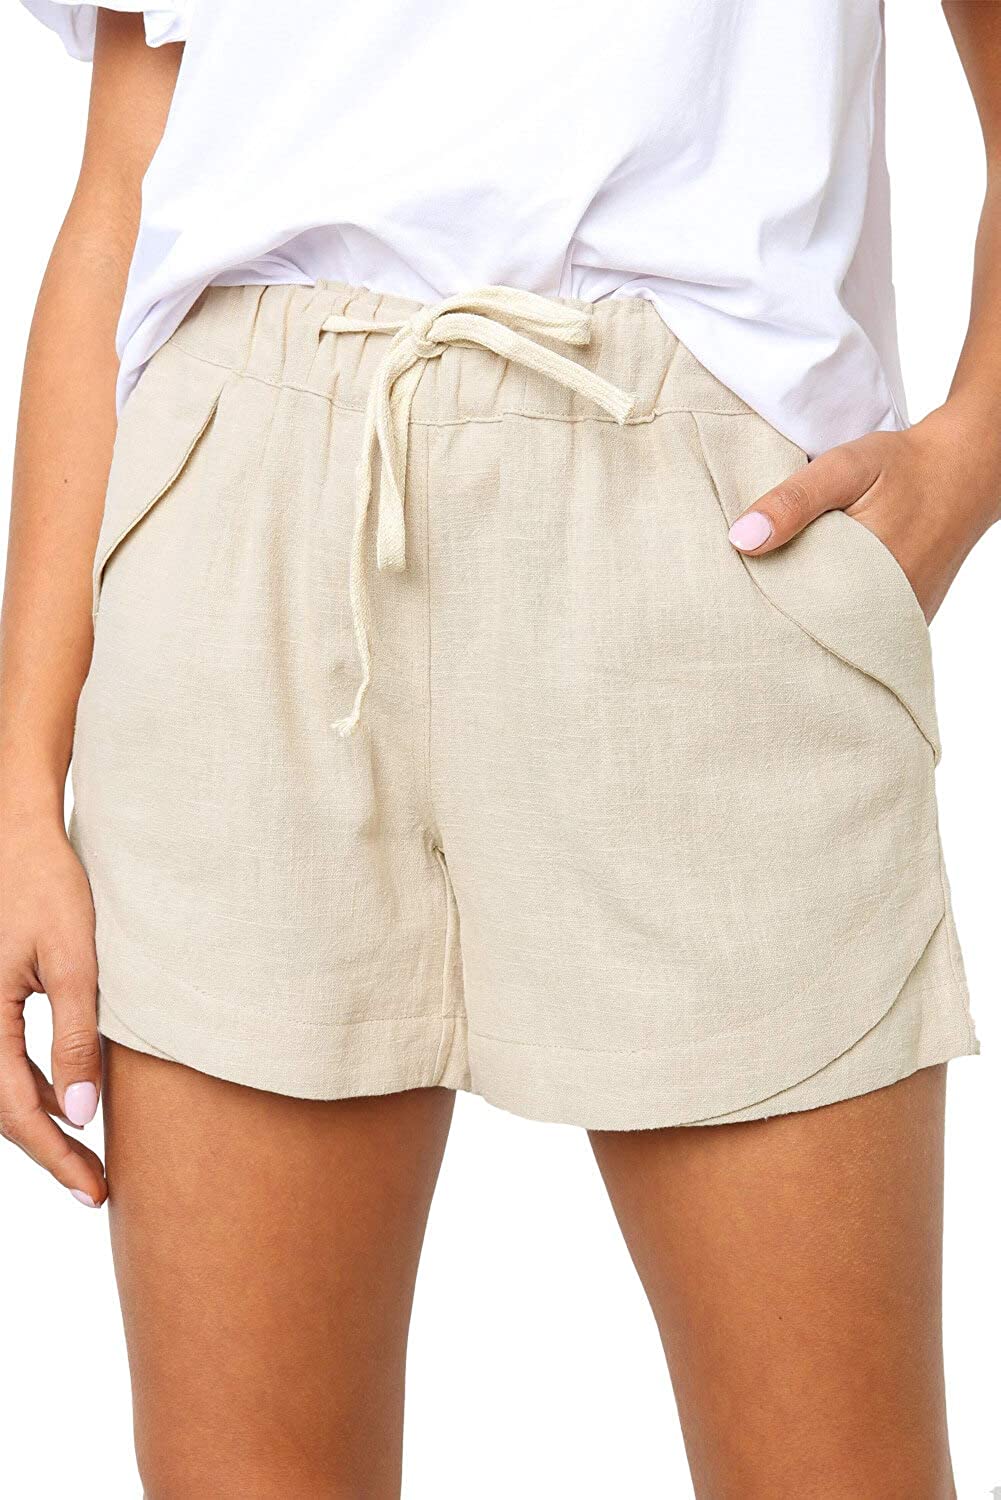 SMENG Womens Casual Comfy Shorts with Pockets Wide Leg Cotton Short 